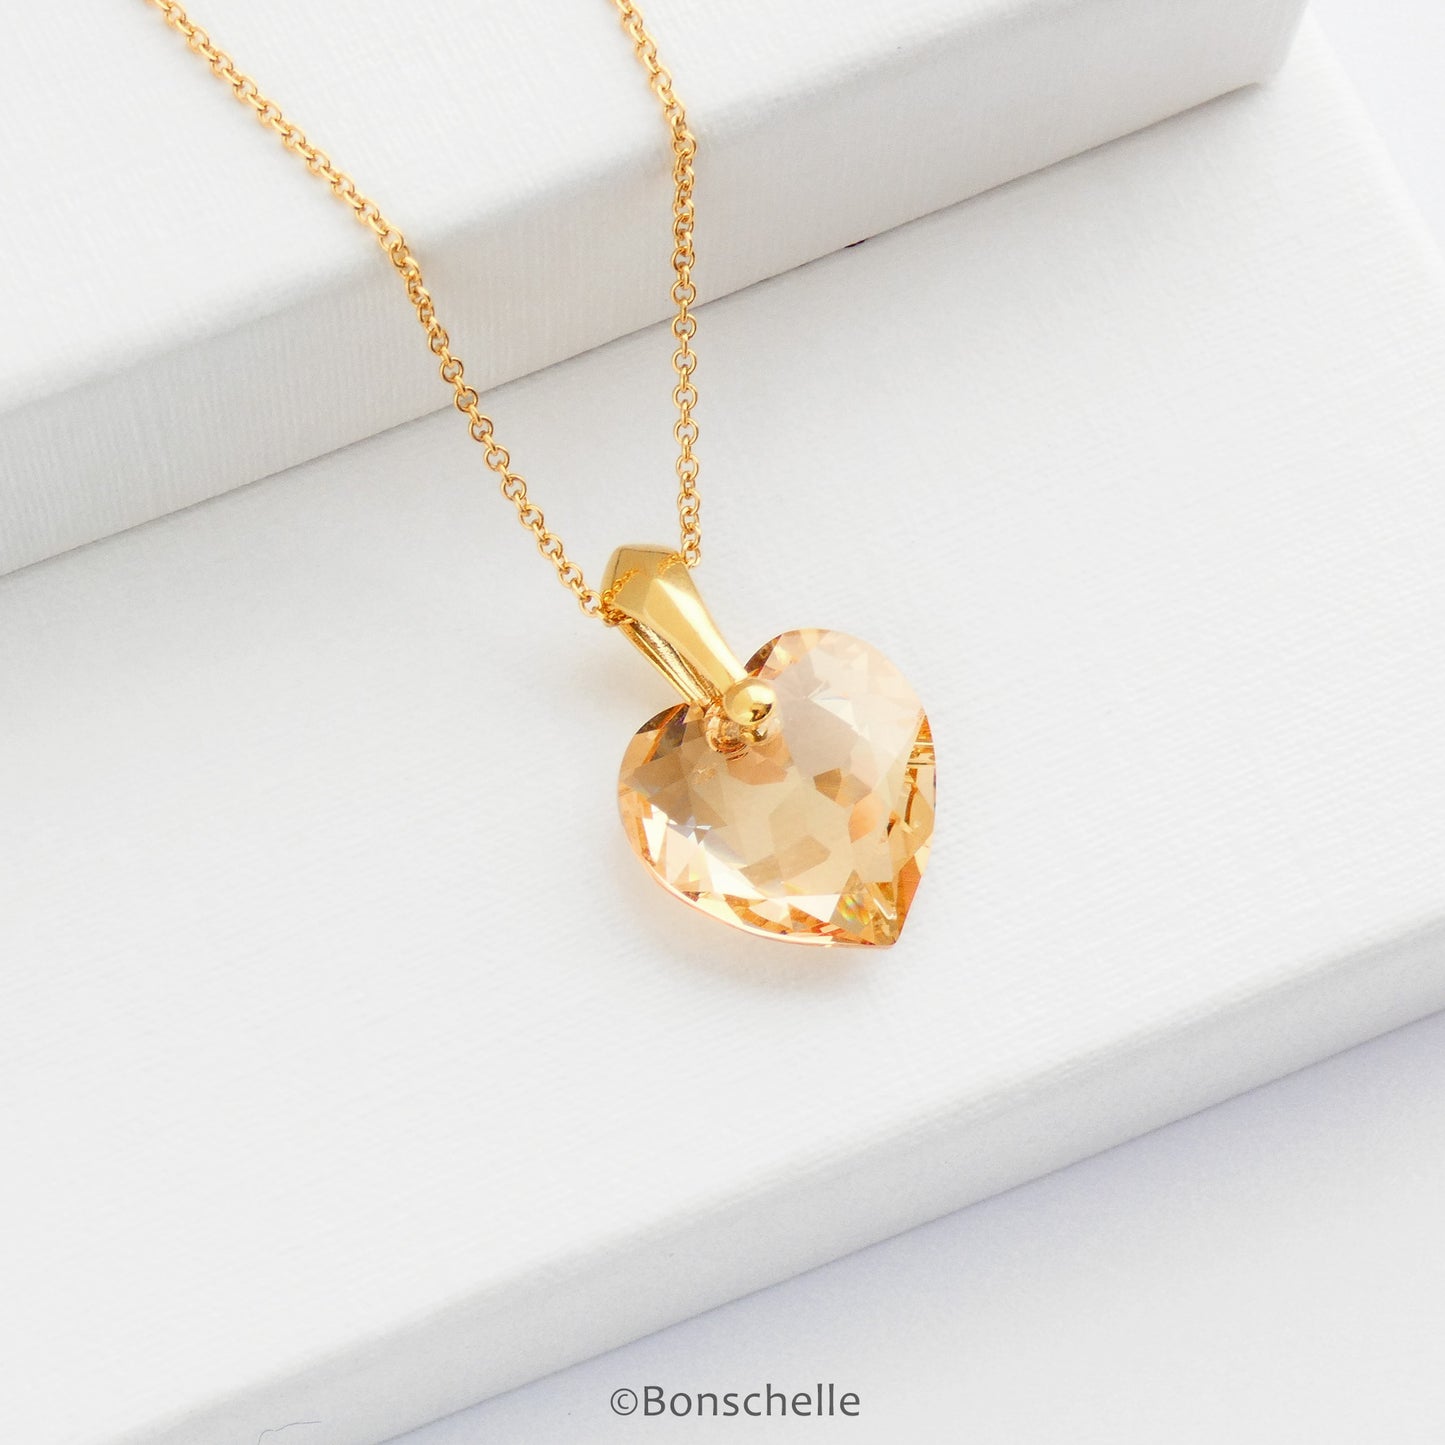   handmade necklace with pale gold colour crystal cut Swarovski heart pendant and 14K gold filled chain 